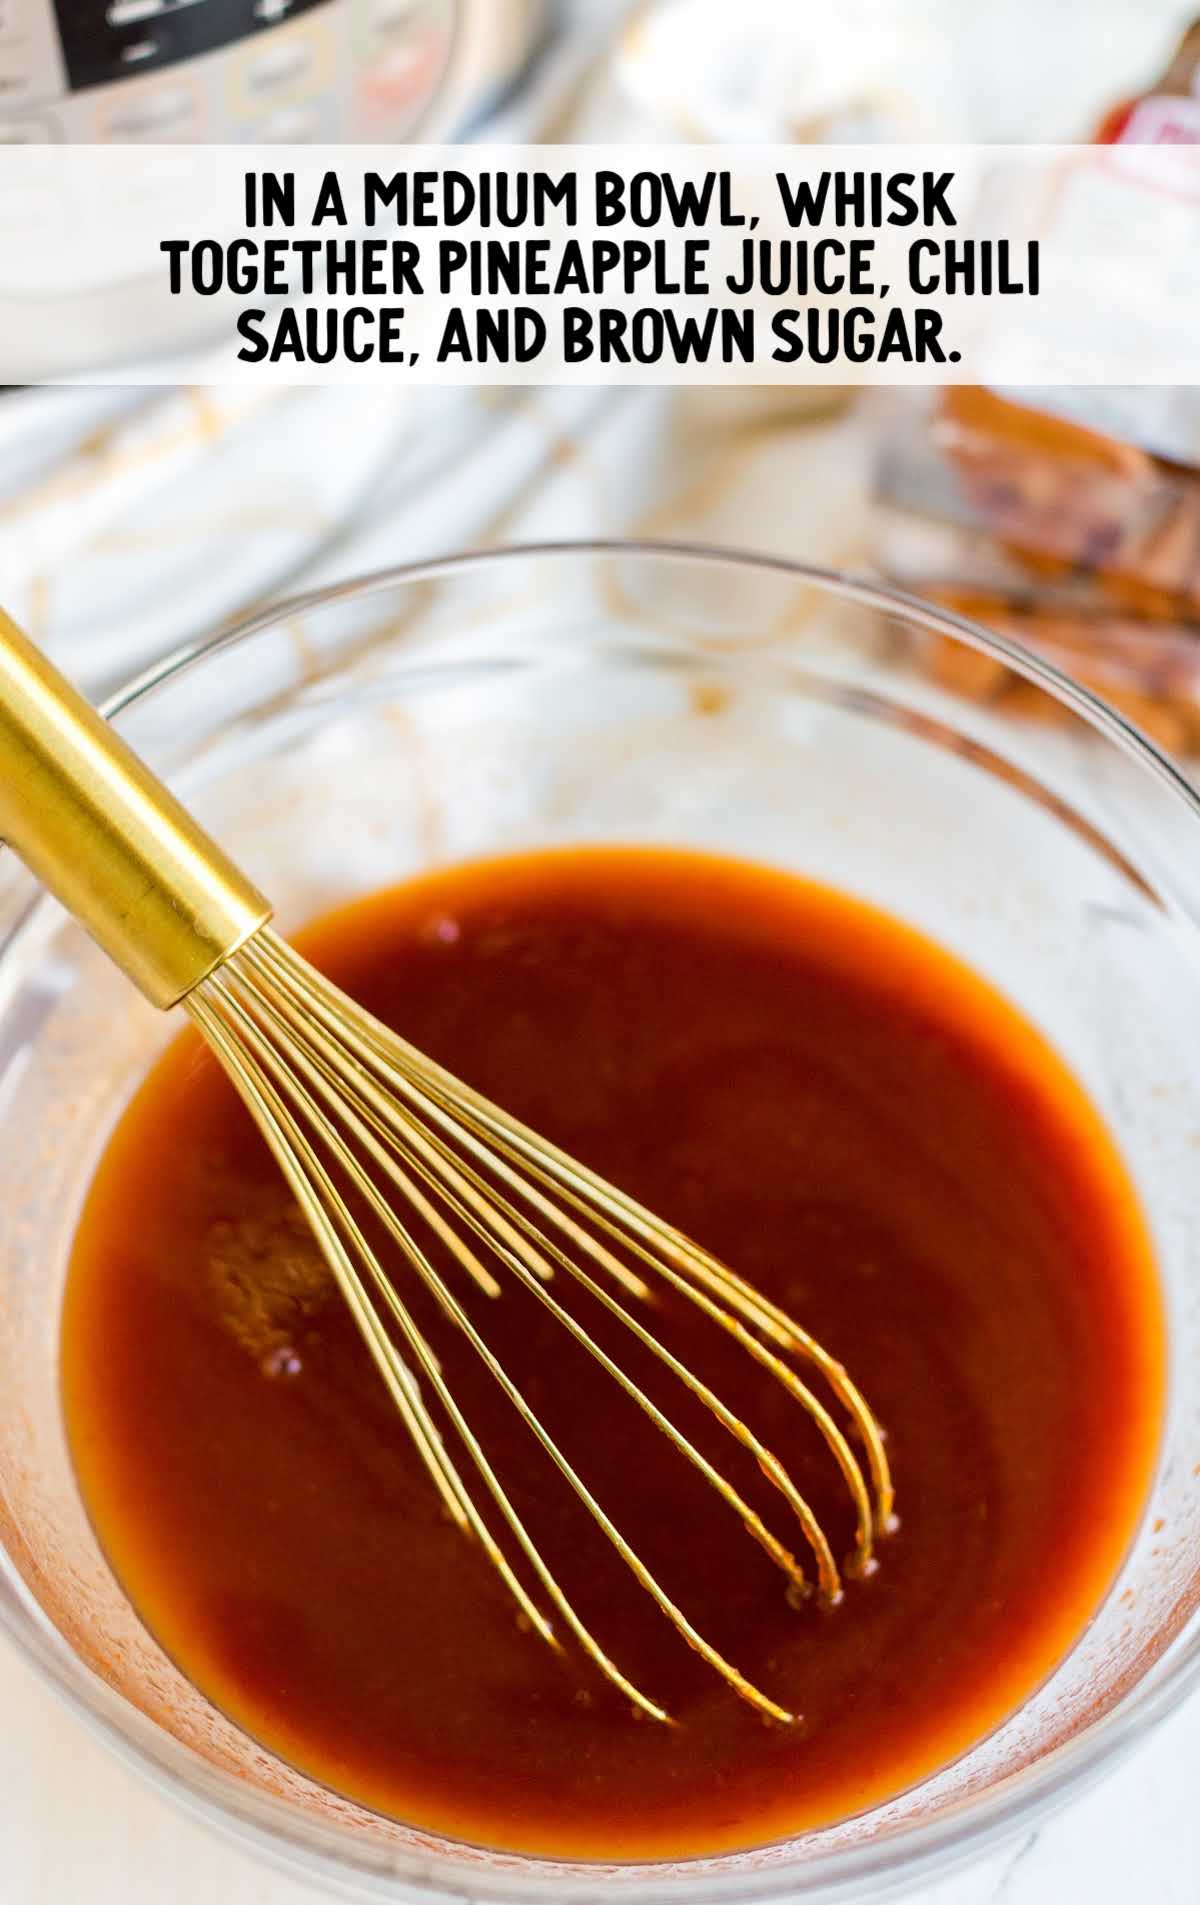 pineapple juice, chili sauce, and brown sugar whisked in a bowl